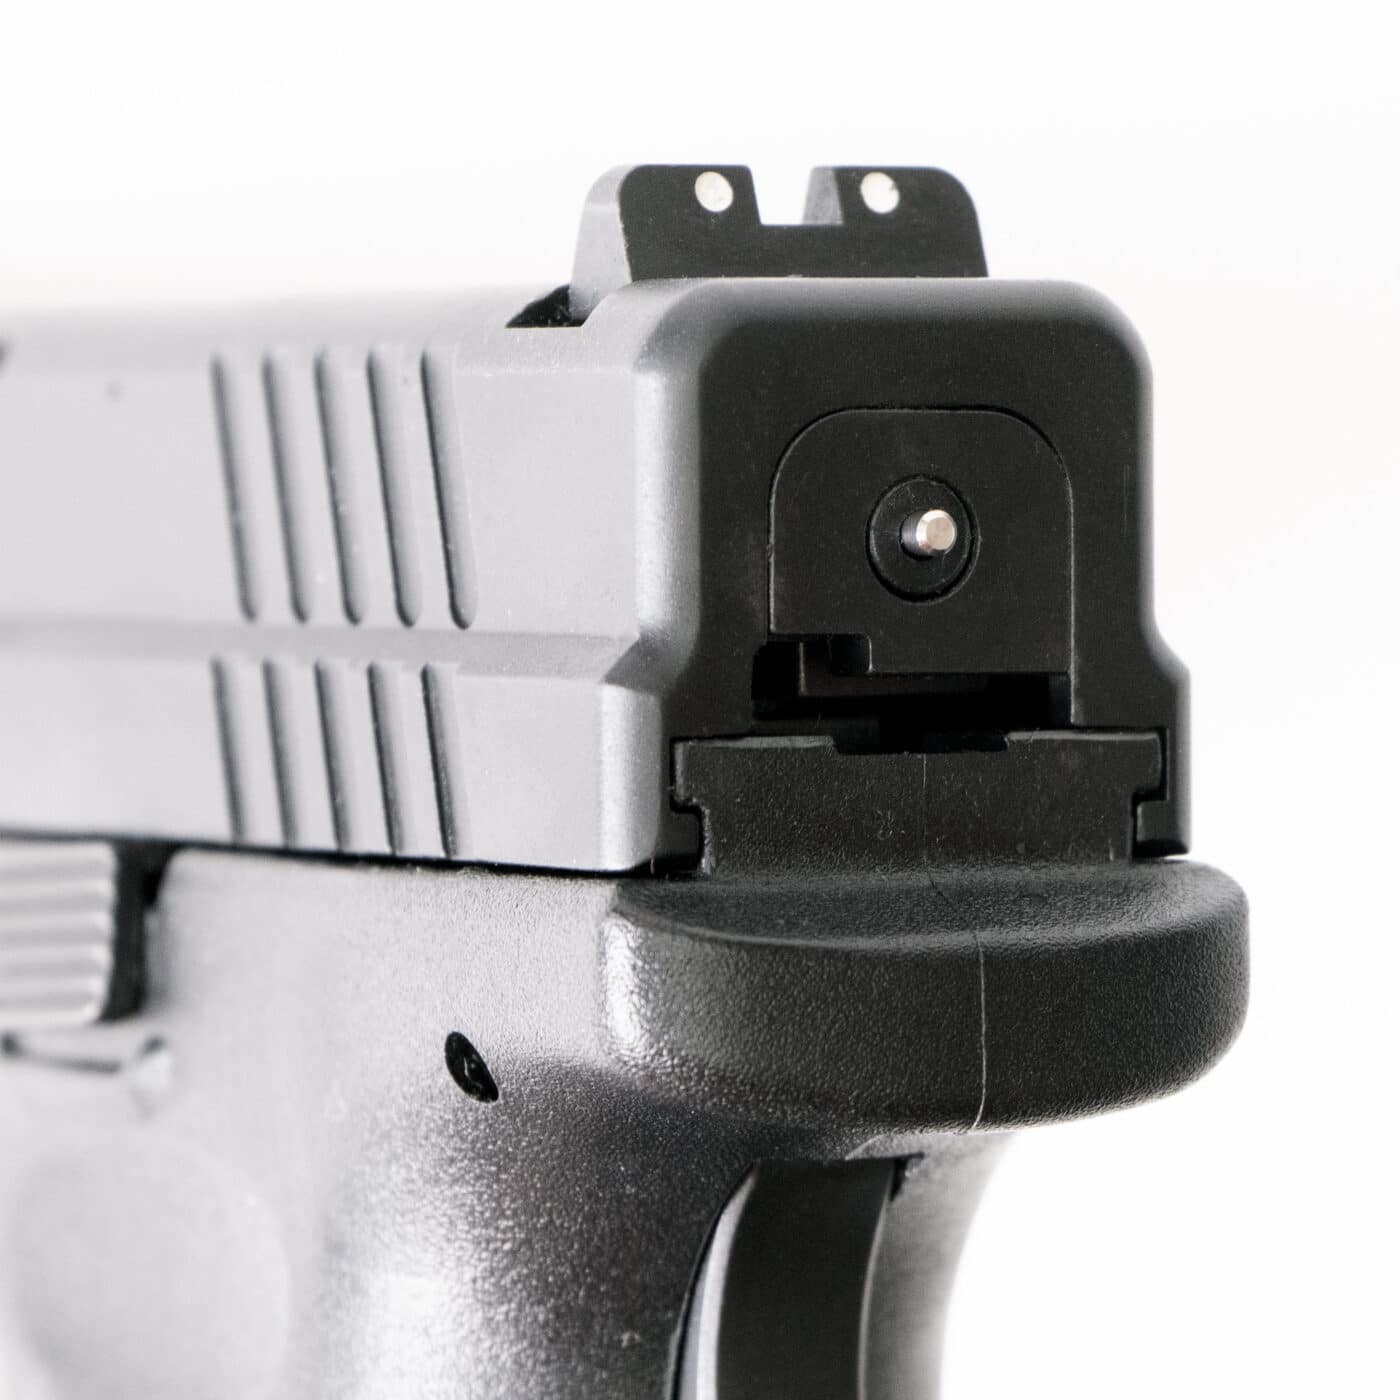 Rear sight of the Springfield XD in .40 S&W